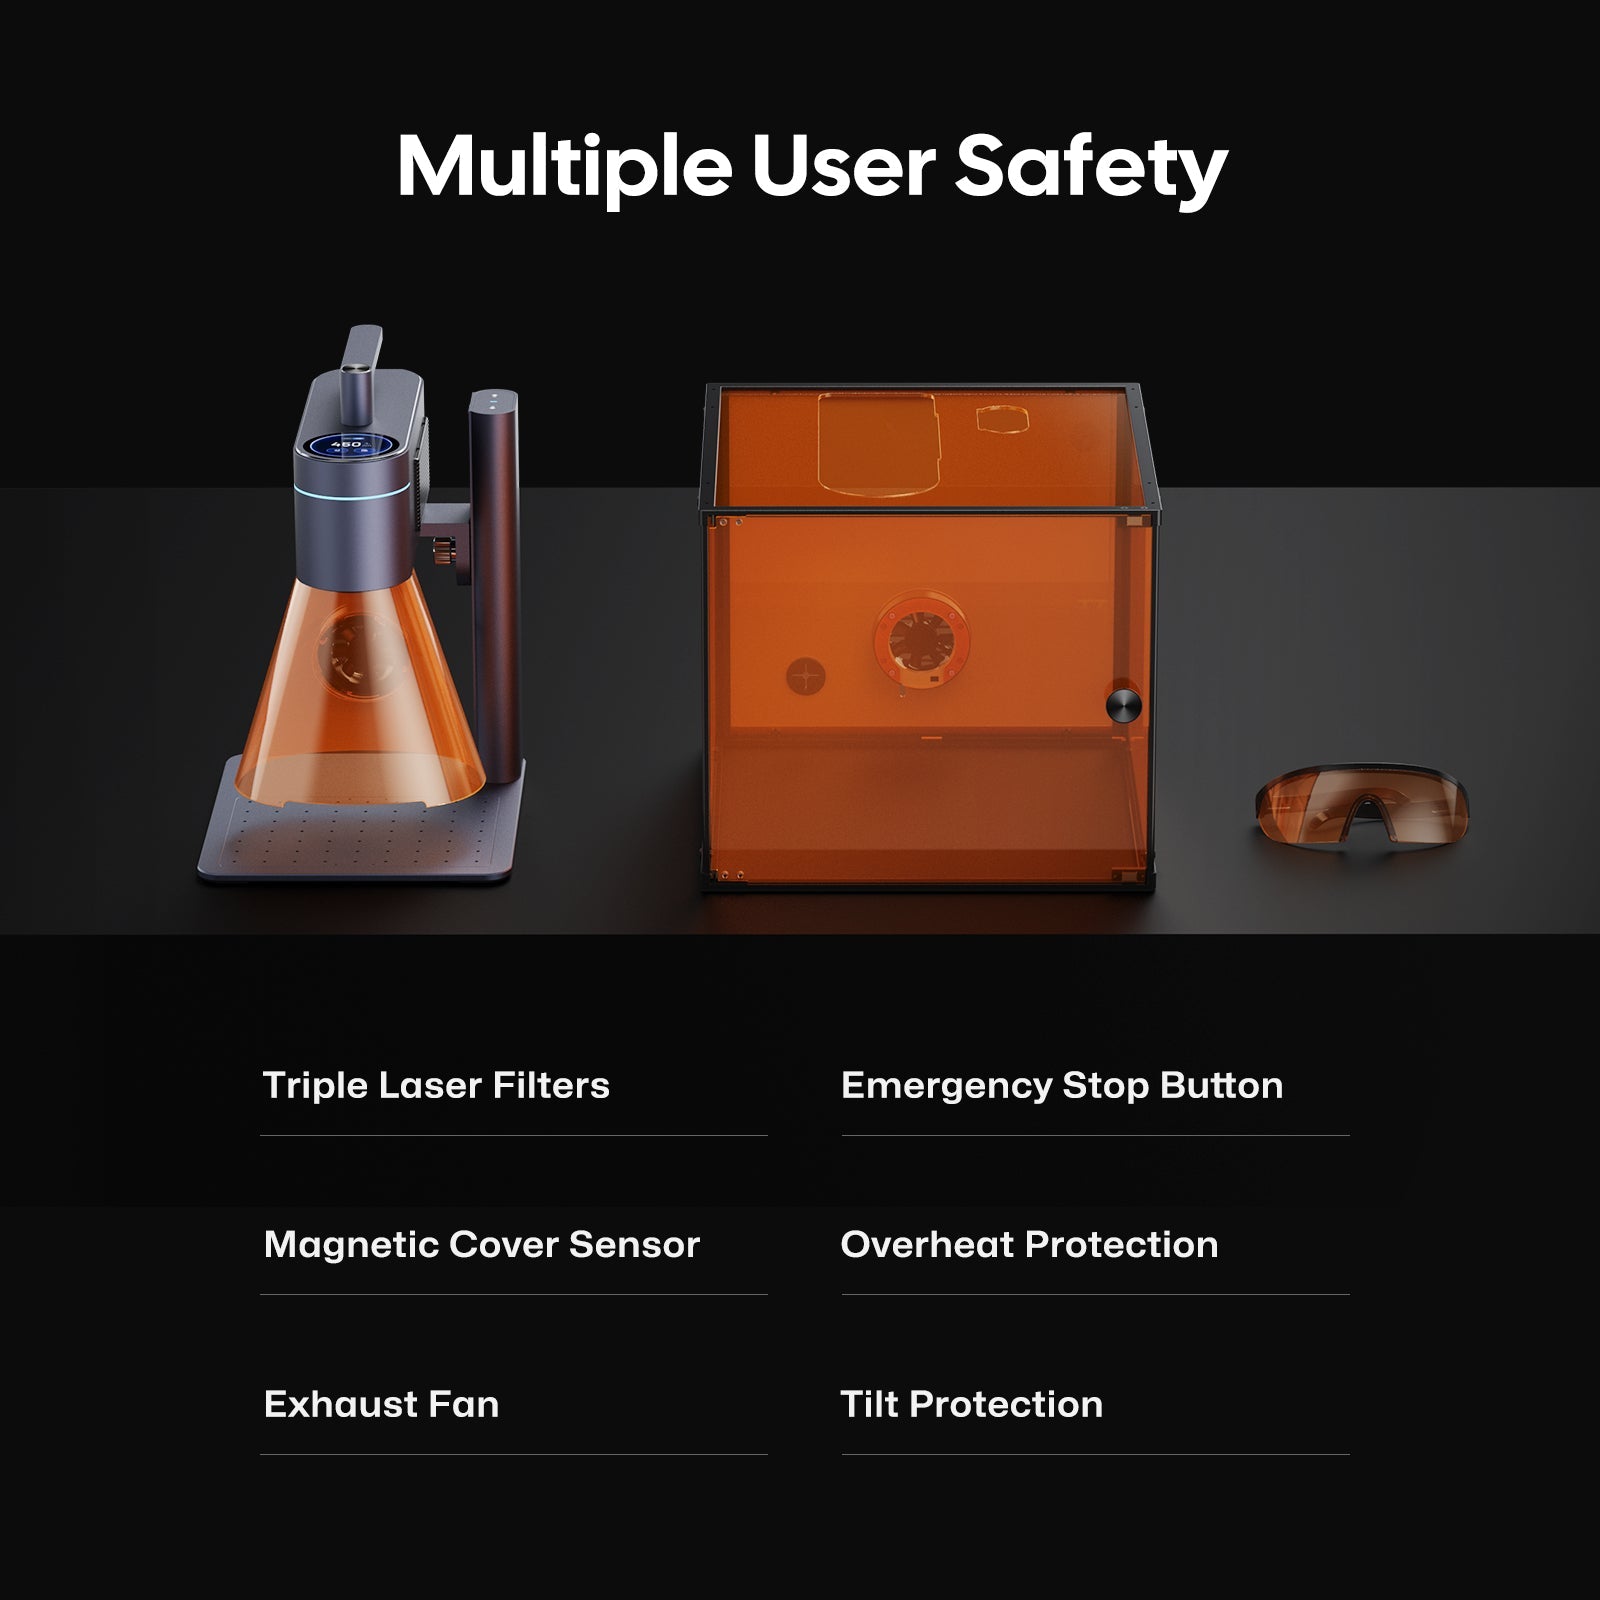 Multiple user safety protections